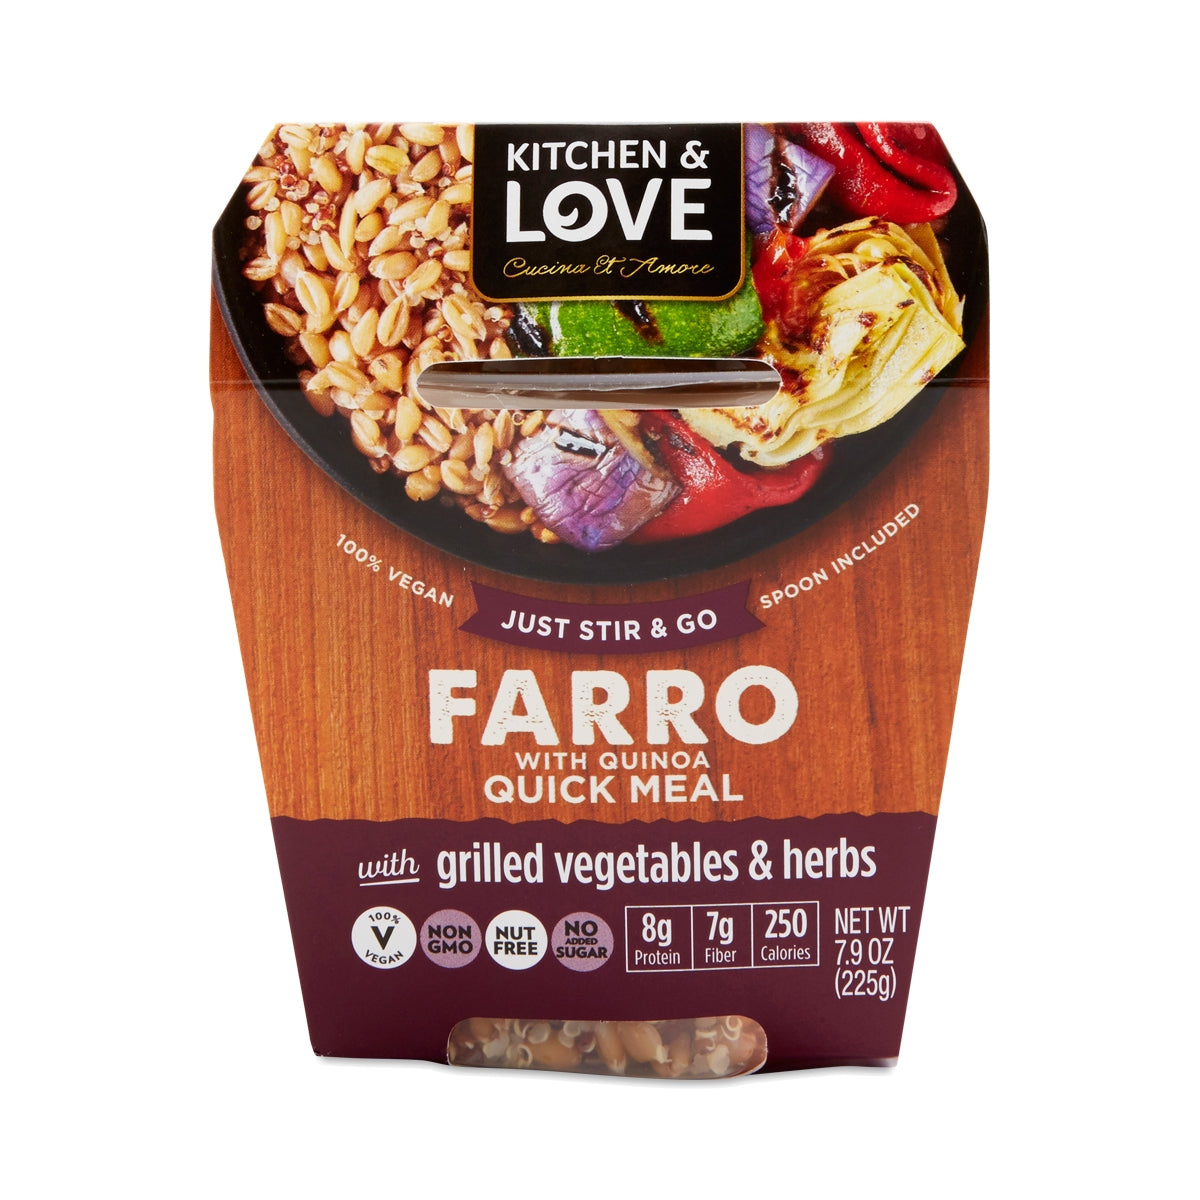 CUCINA & AMORE: Farro Meal Grilled Vegetable Herb, 7.9 oz - Vending Business Solutions